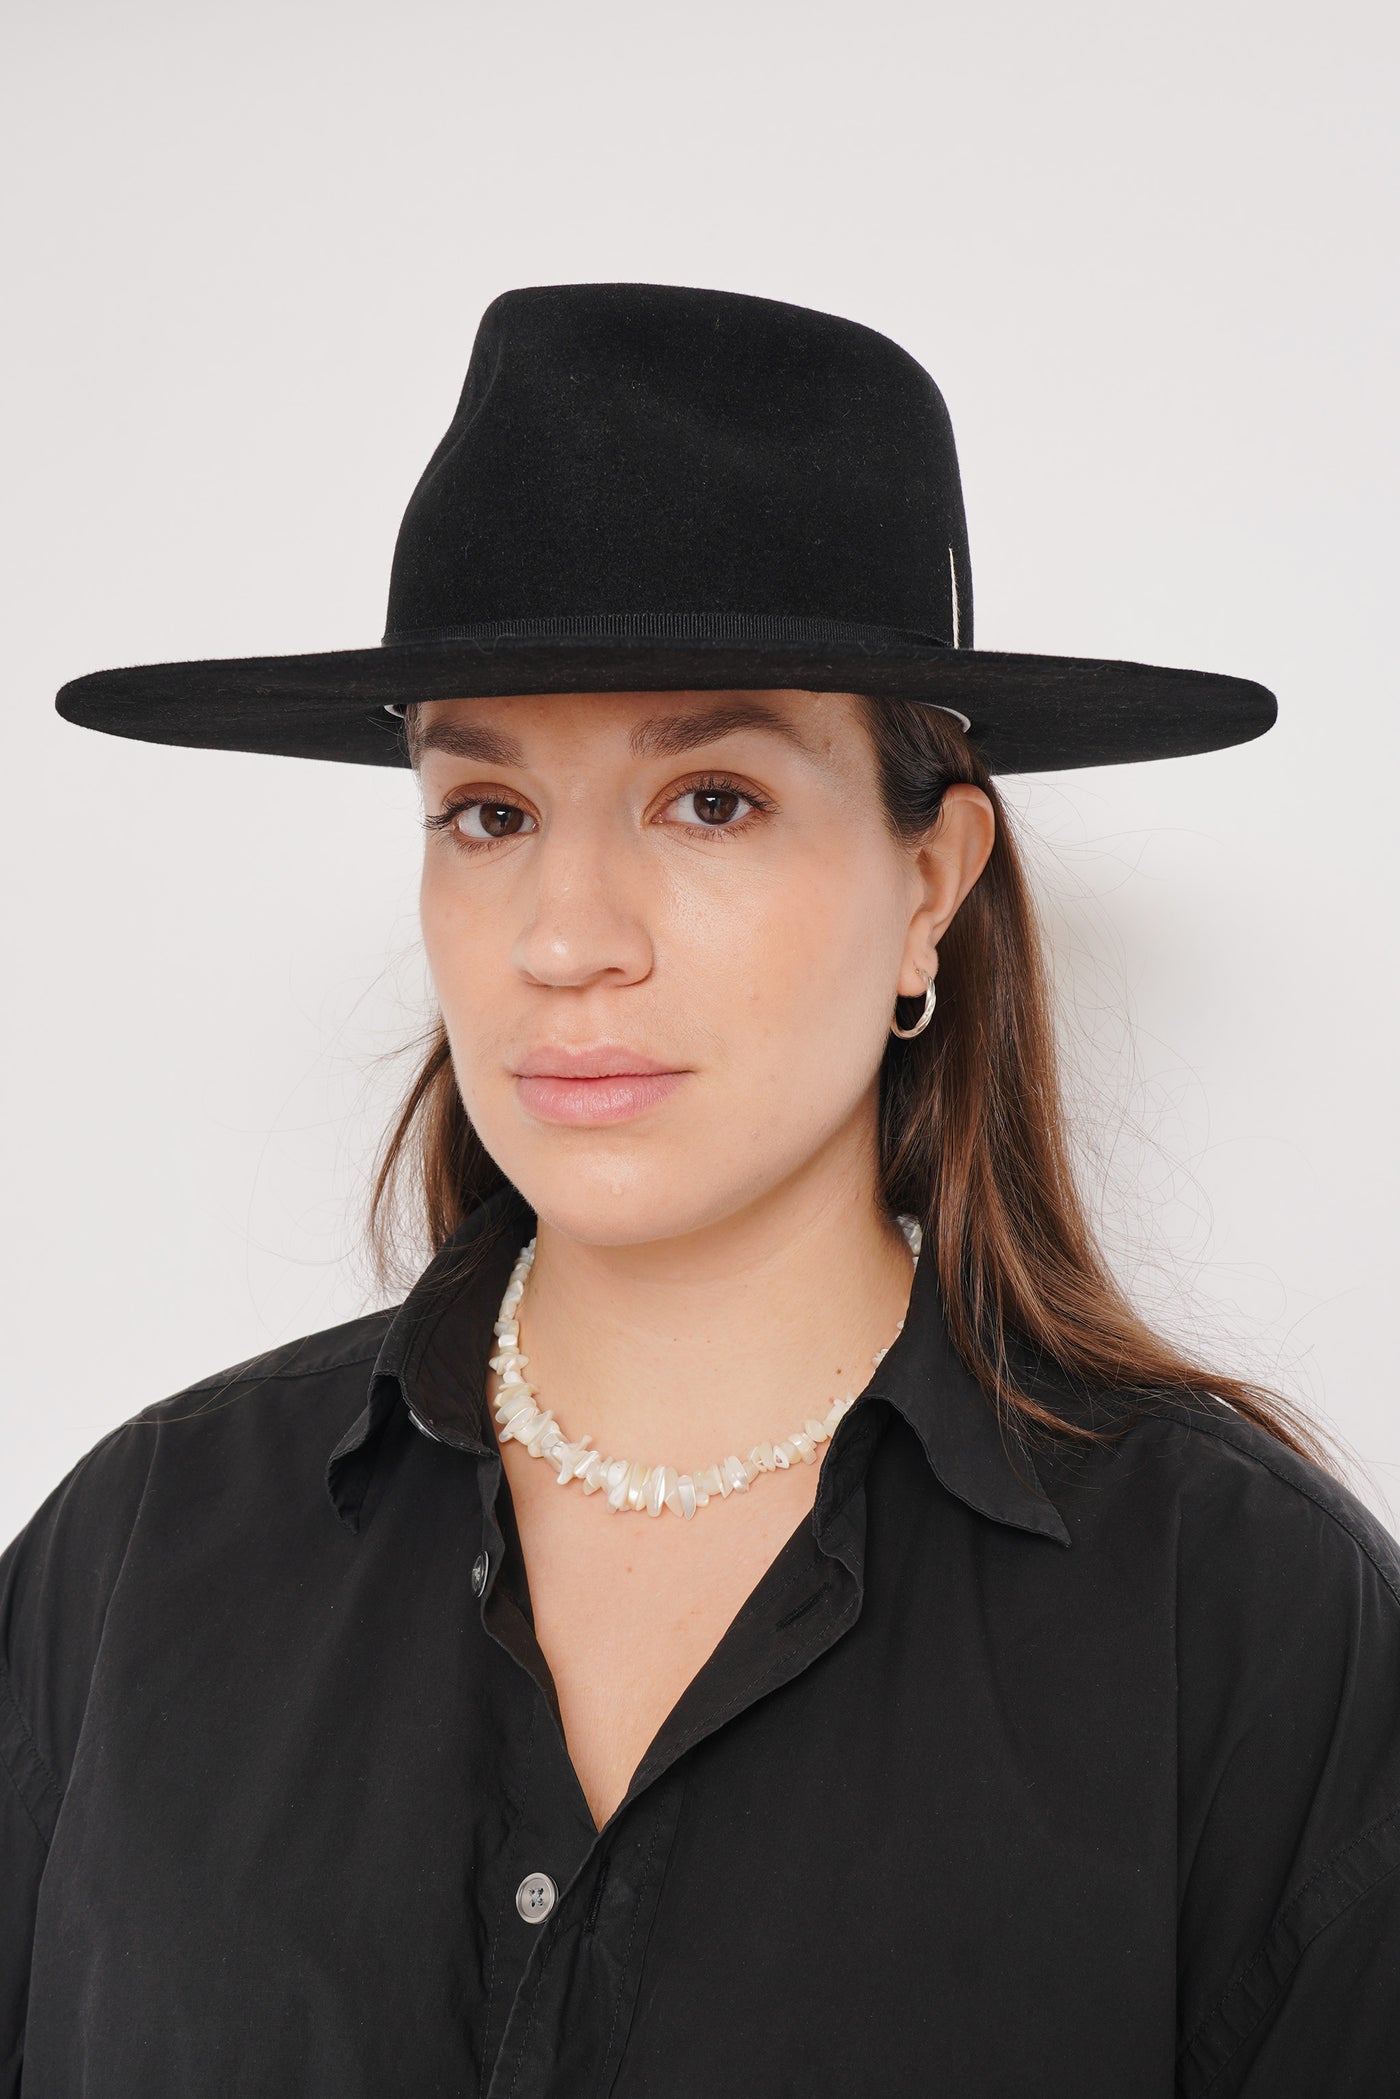 Unisex black fur felt fedora hat with a wide brim, black ribbon and tear drop crown, handcrafted by SoonNoon in Stockholm